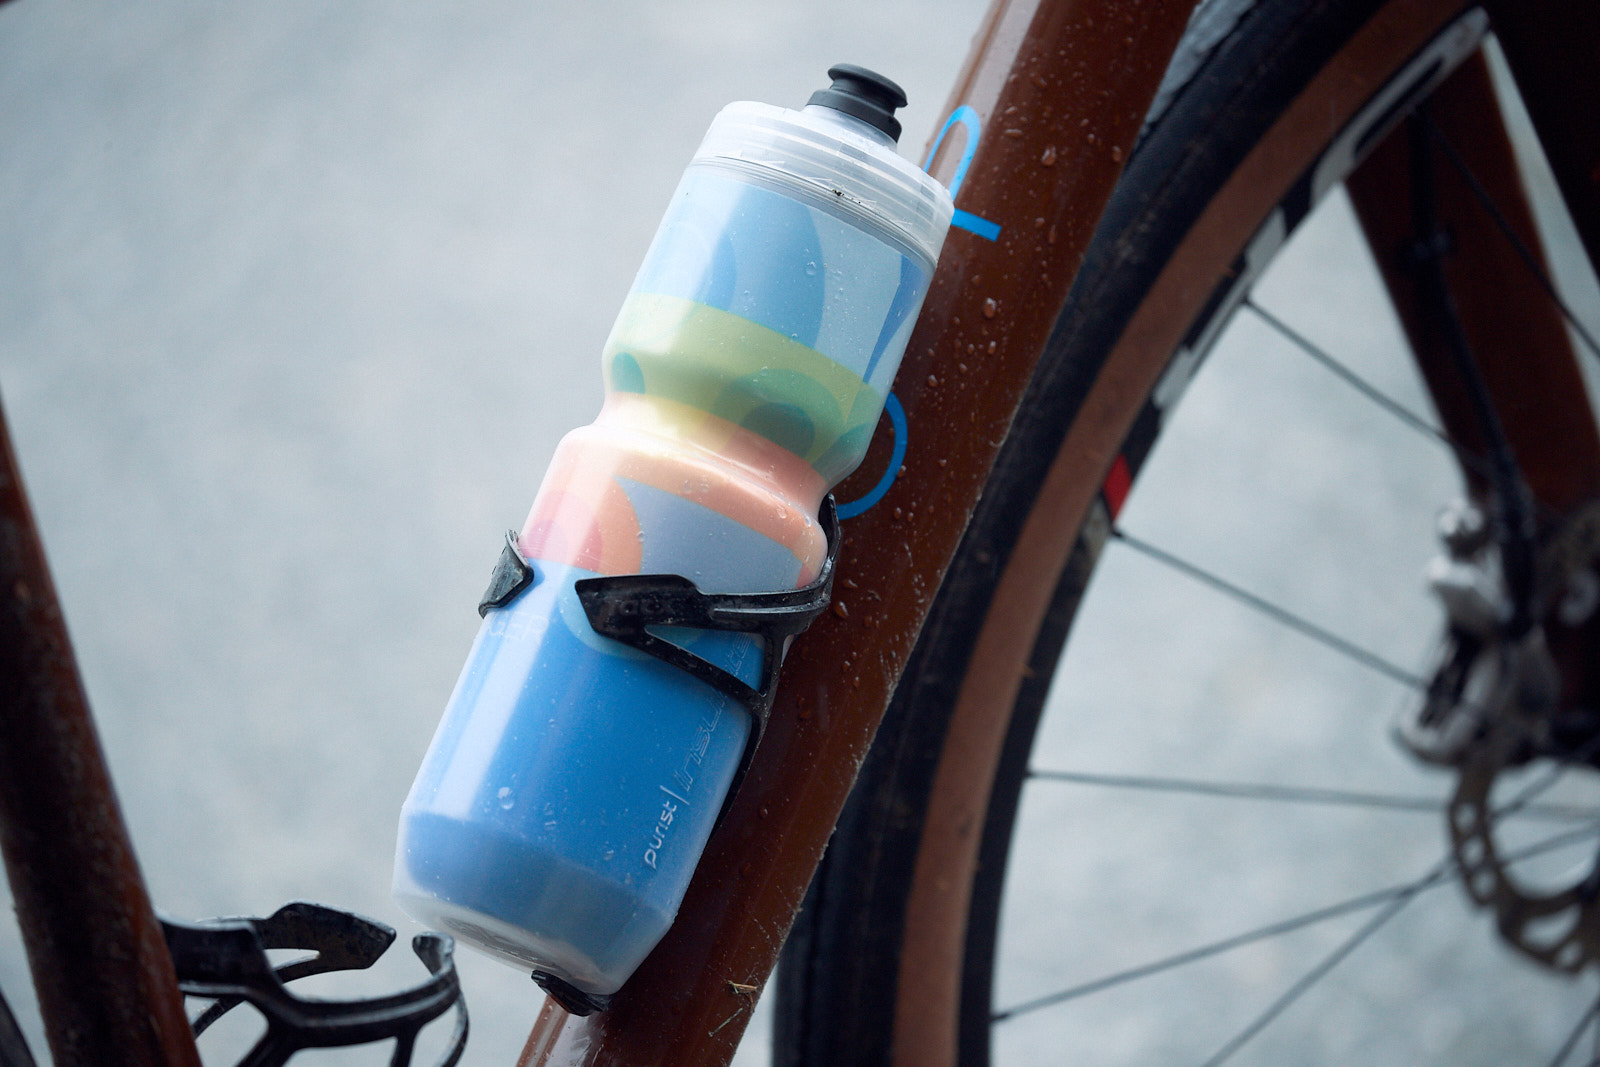 Our Seasons Purist insulated bottle is $14.99 on Amazon and available now.